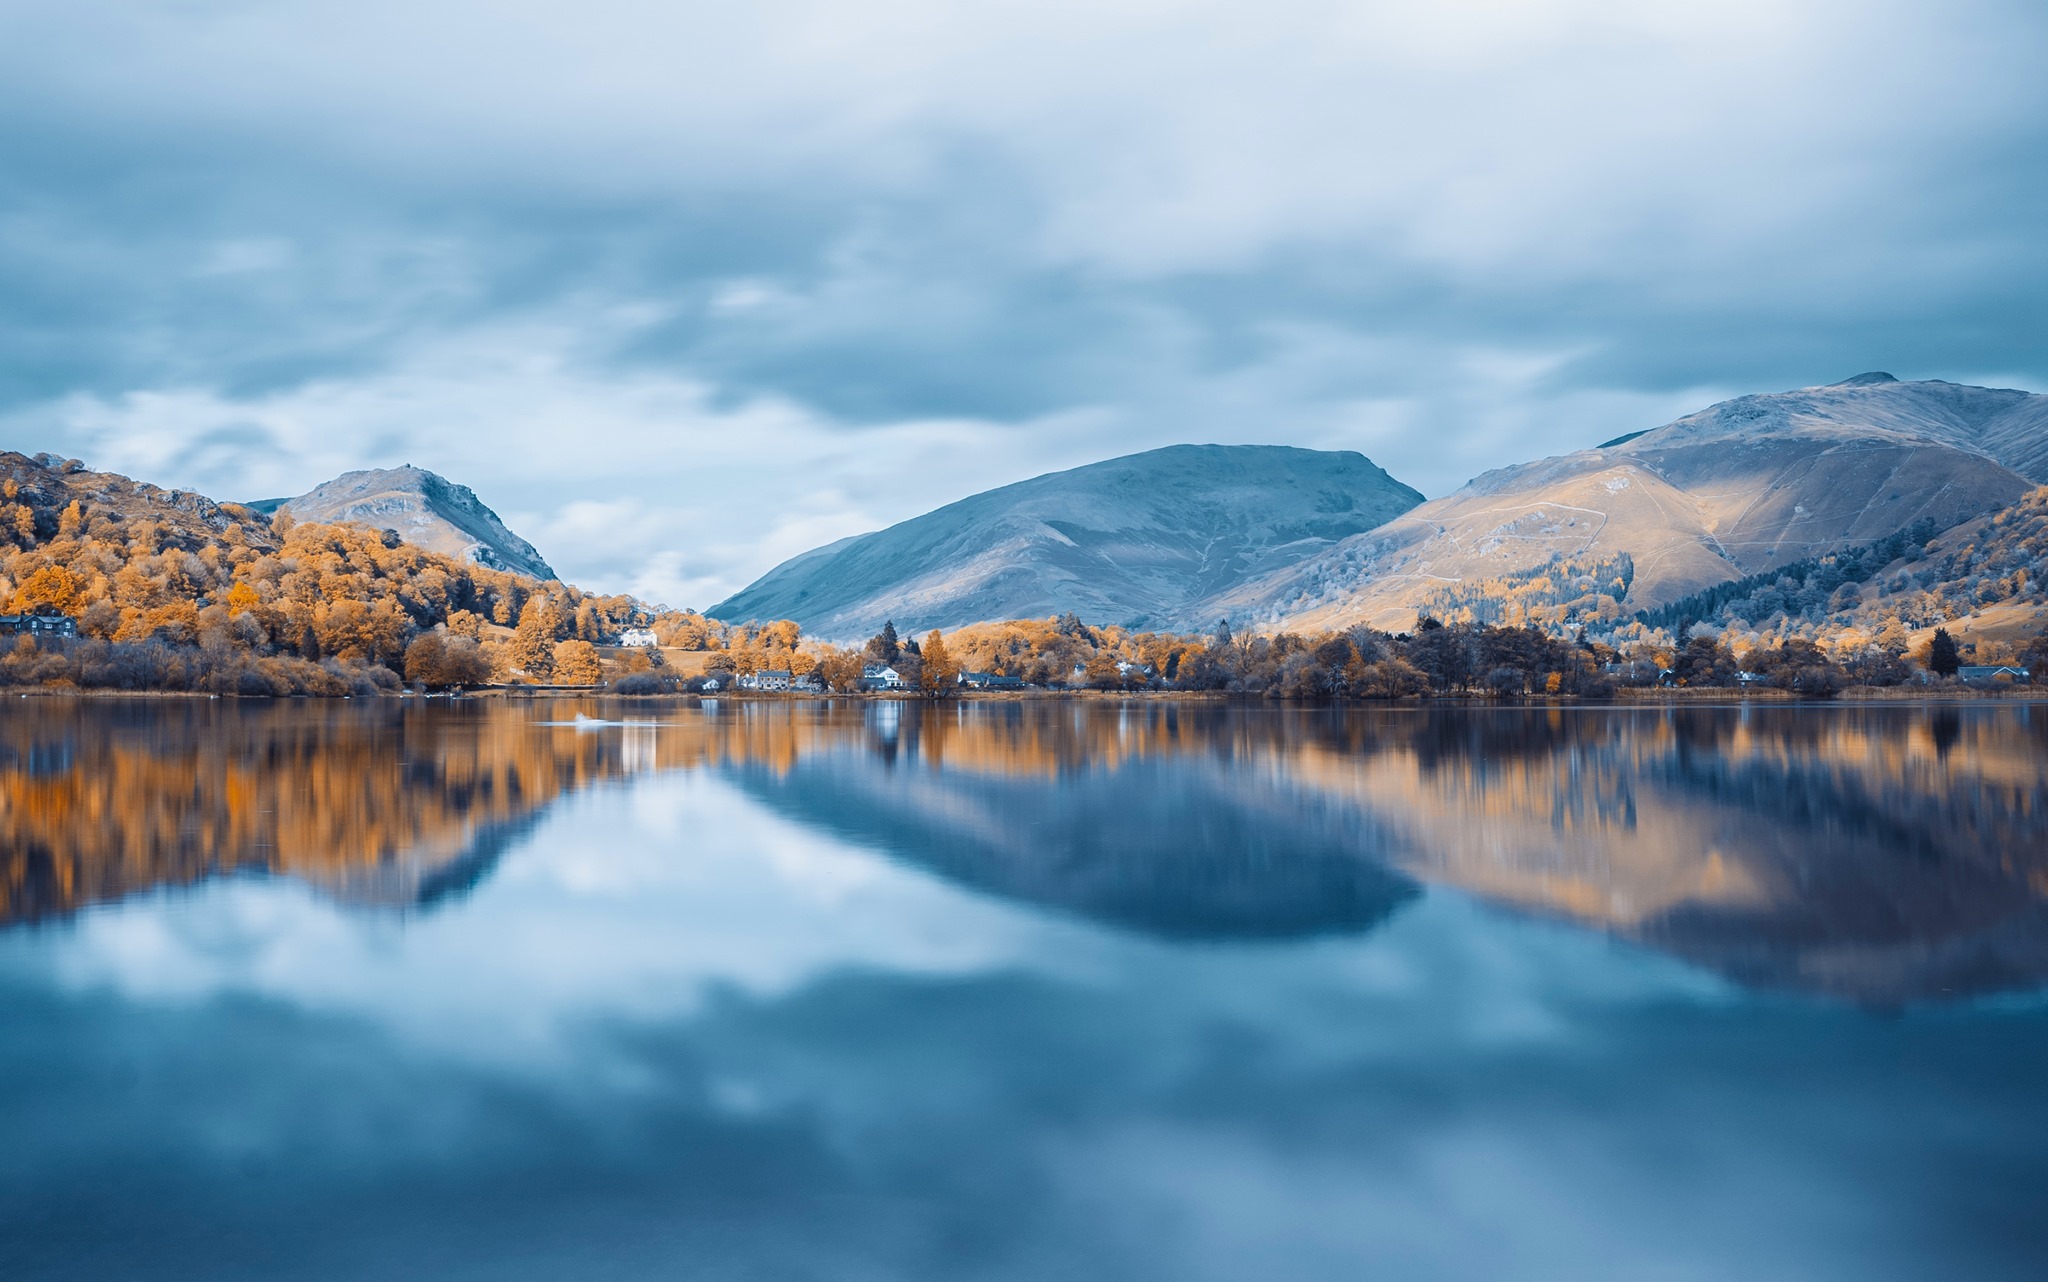 Camera Club member Jonny Gios submitted a tranquil Grasmere